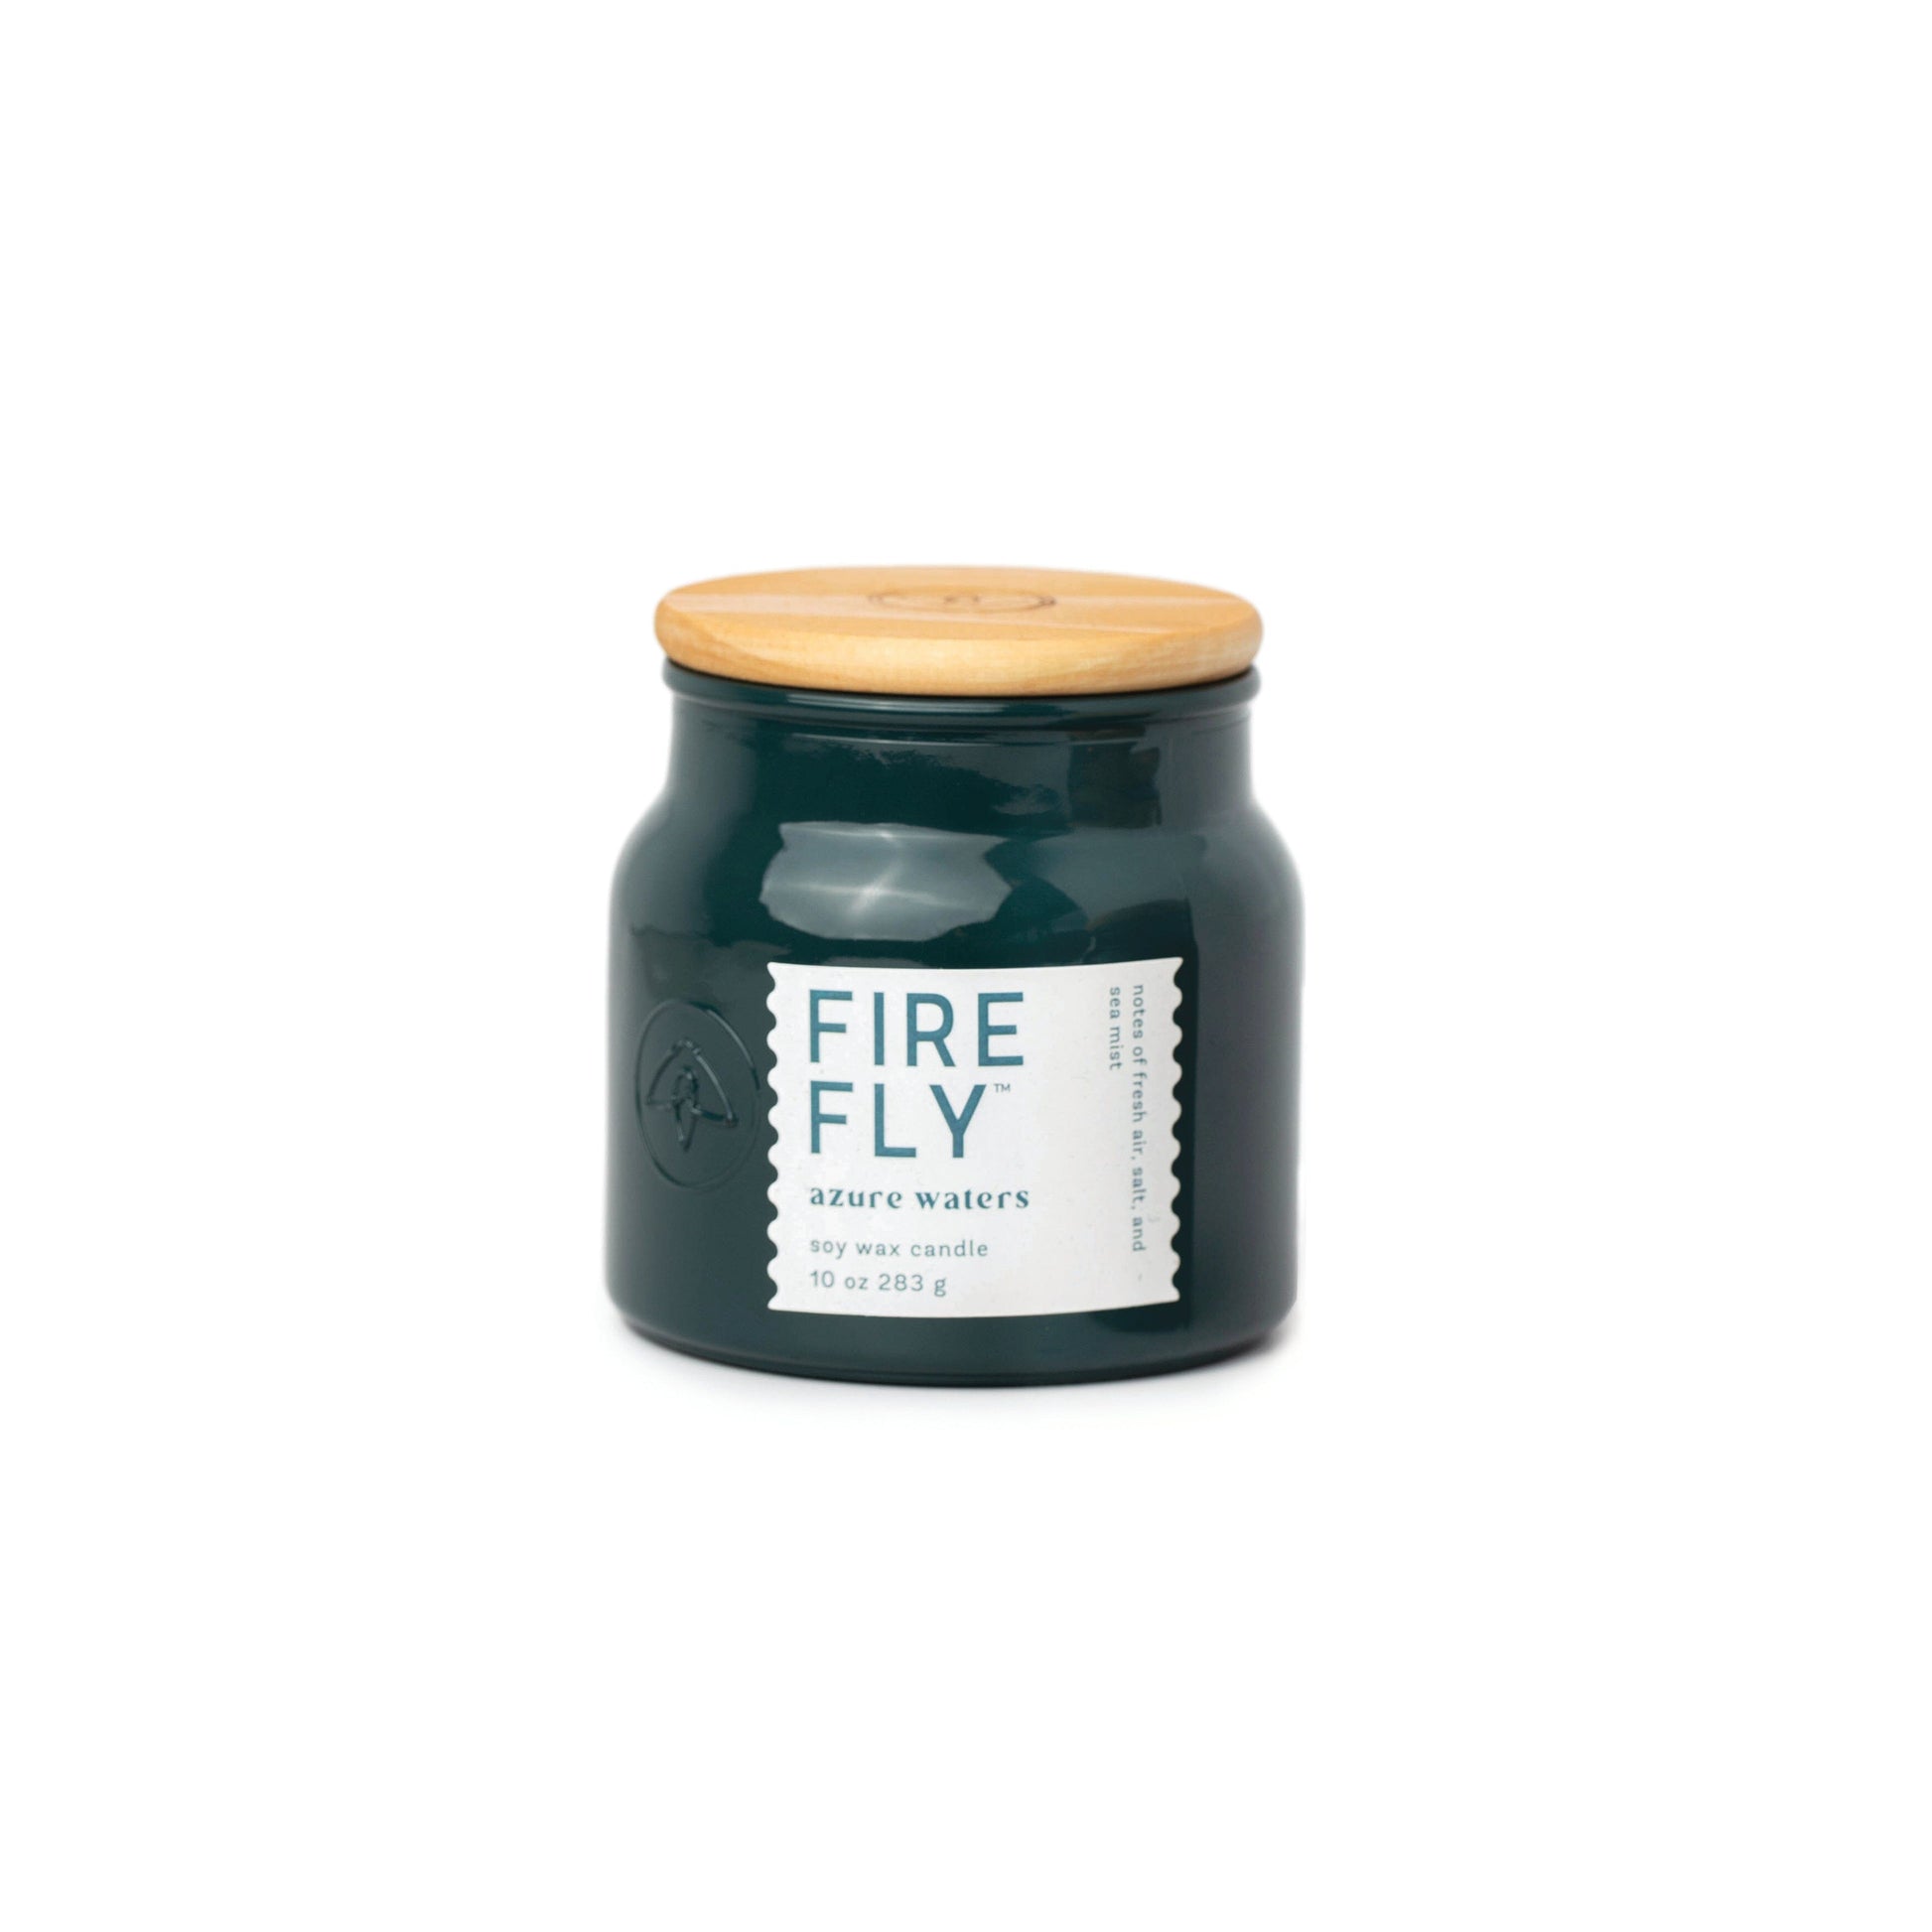 Azure Waters Sol Candle by Firefly